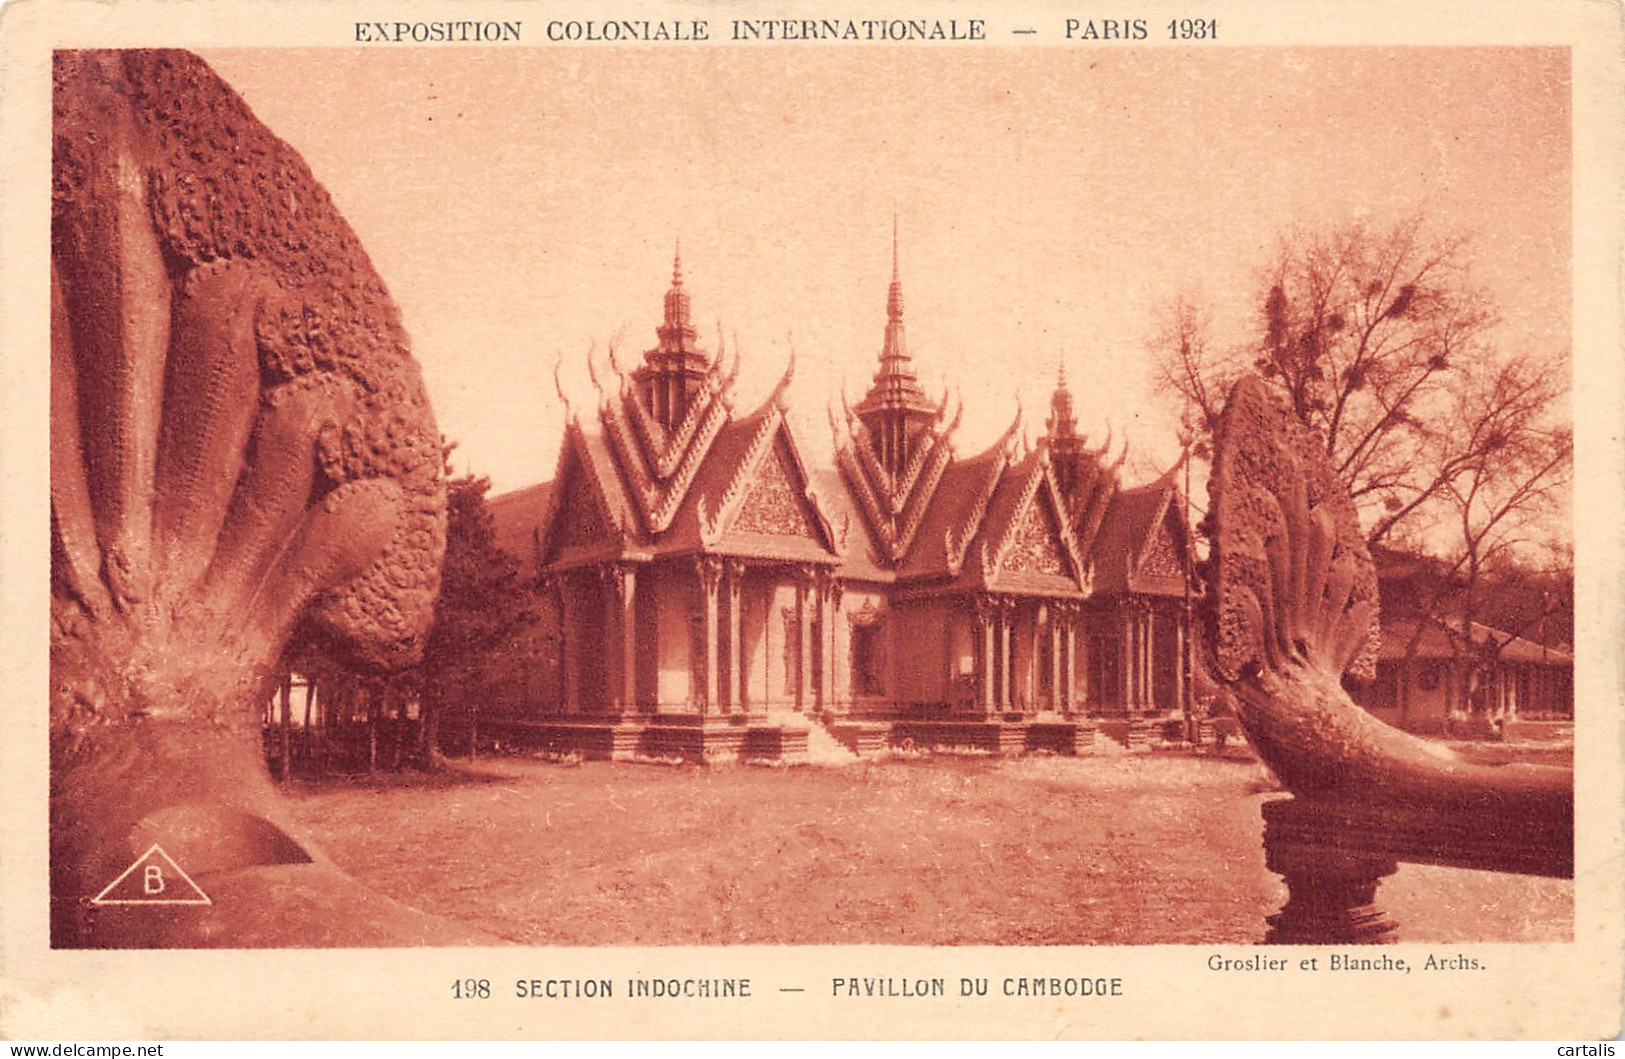 75-PARIS EXPO COLONIALE INTERNATIONALE CAMBODGE-N°4226-D/0185 - Expositions